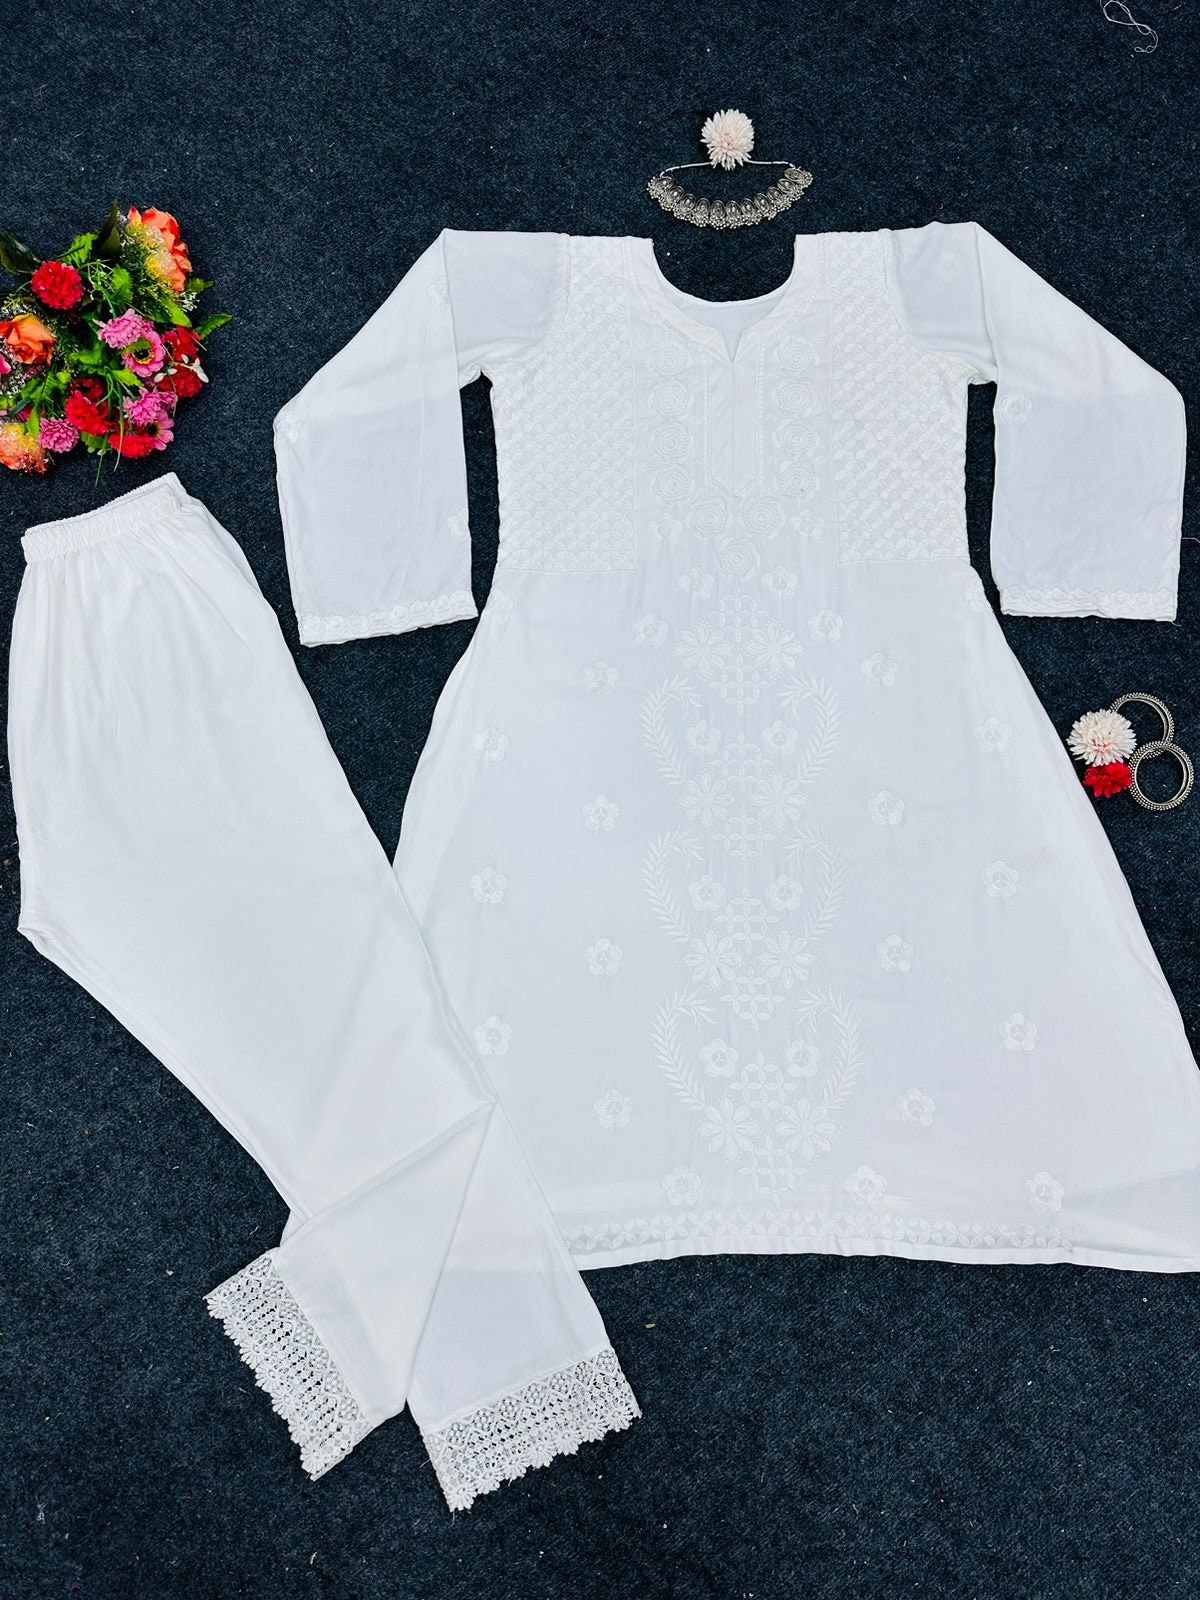 Lucknowi Chikankari White Gala Booti Short Kurti Rayon Fabric Super Soft  and Super Comfortable Kurti Elegant Ethnic Wear for Women Free - Etsy |  Quick outfits, Easy trendy outfits, Desi fashion casual